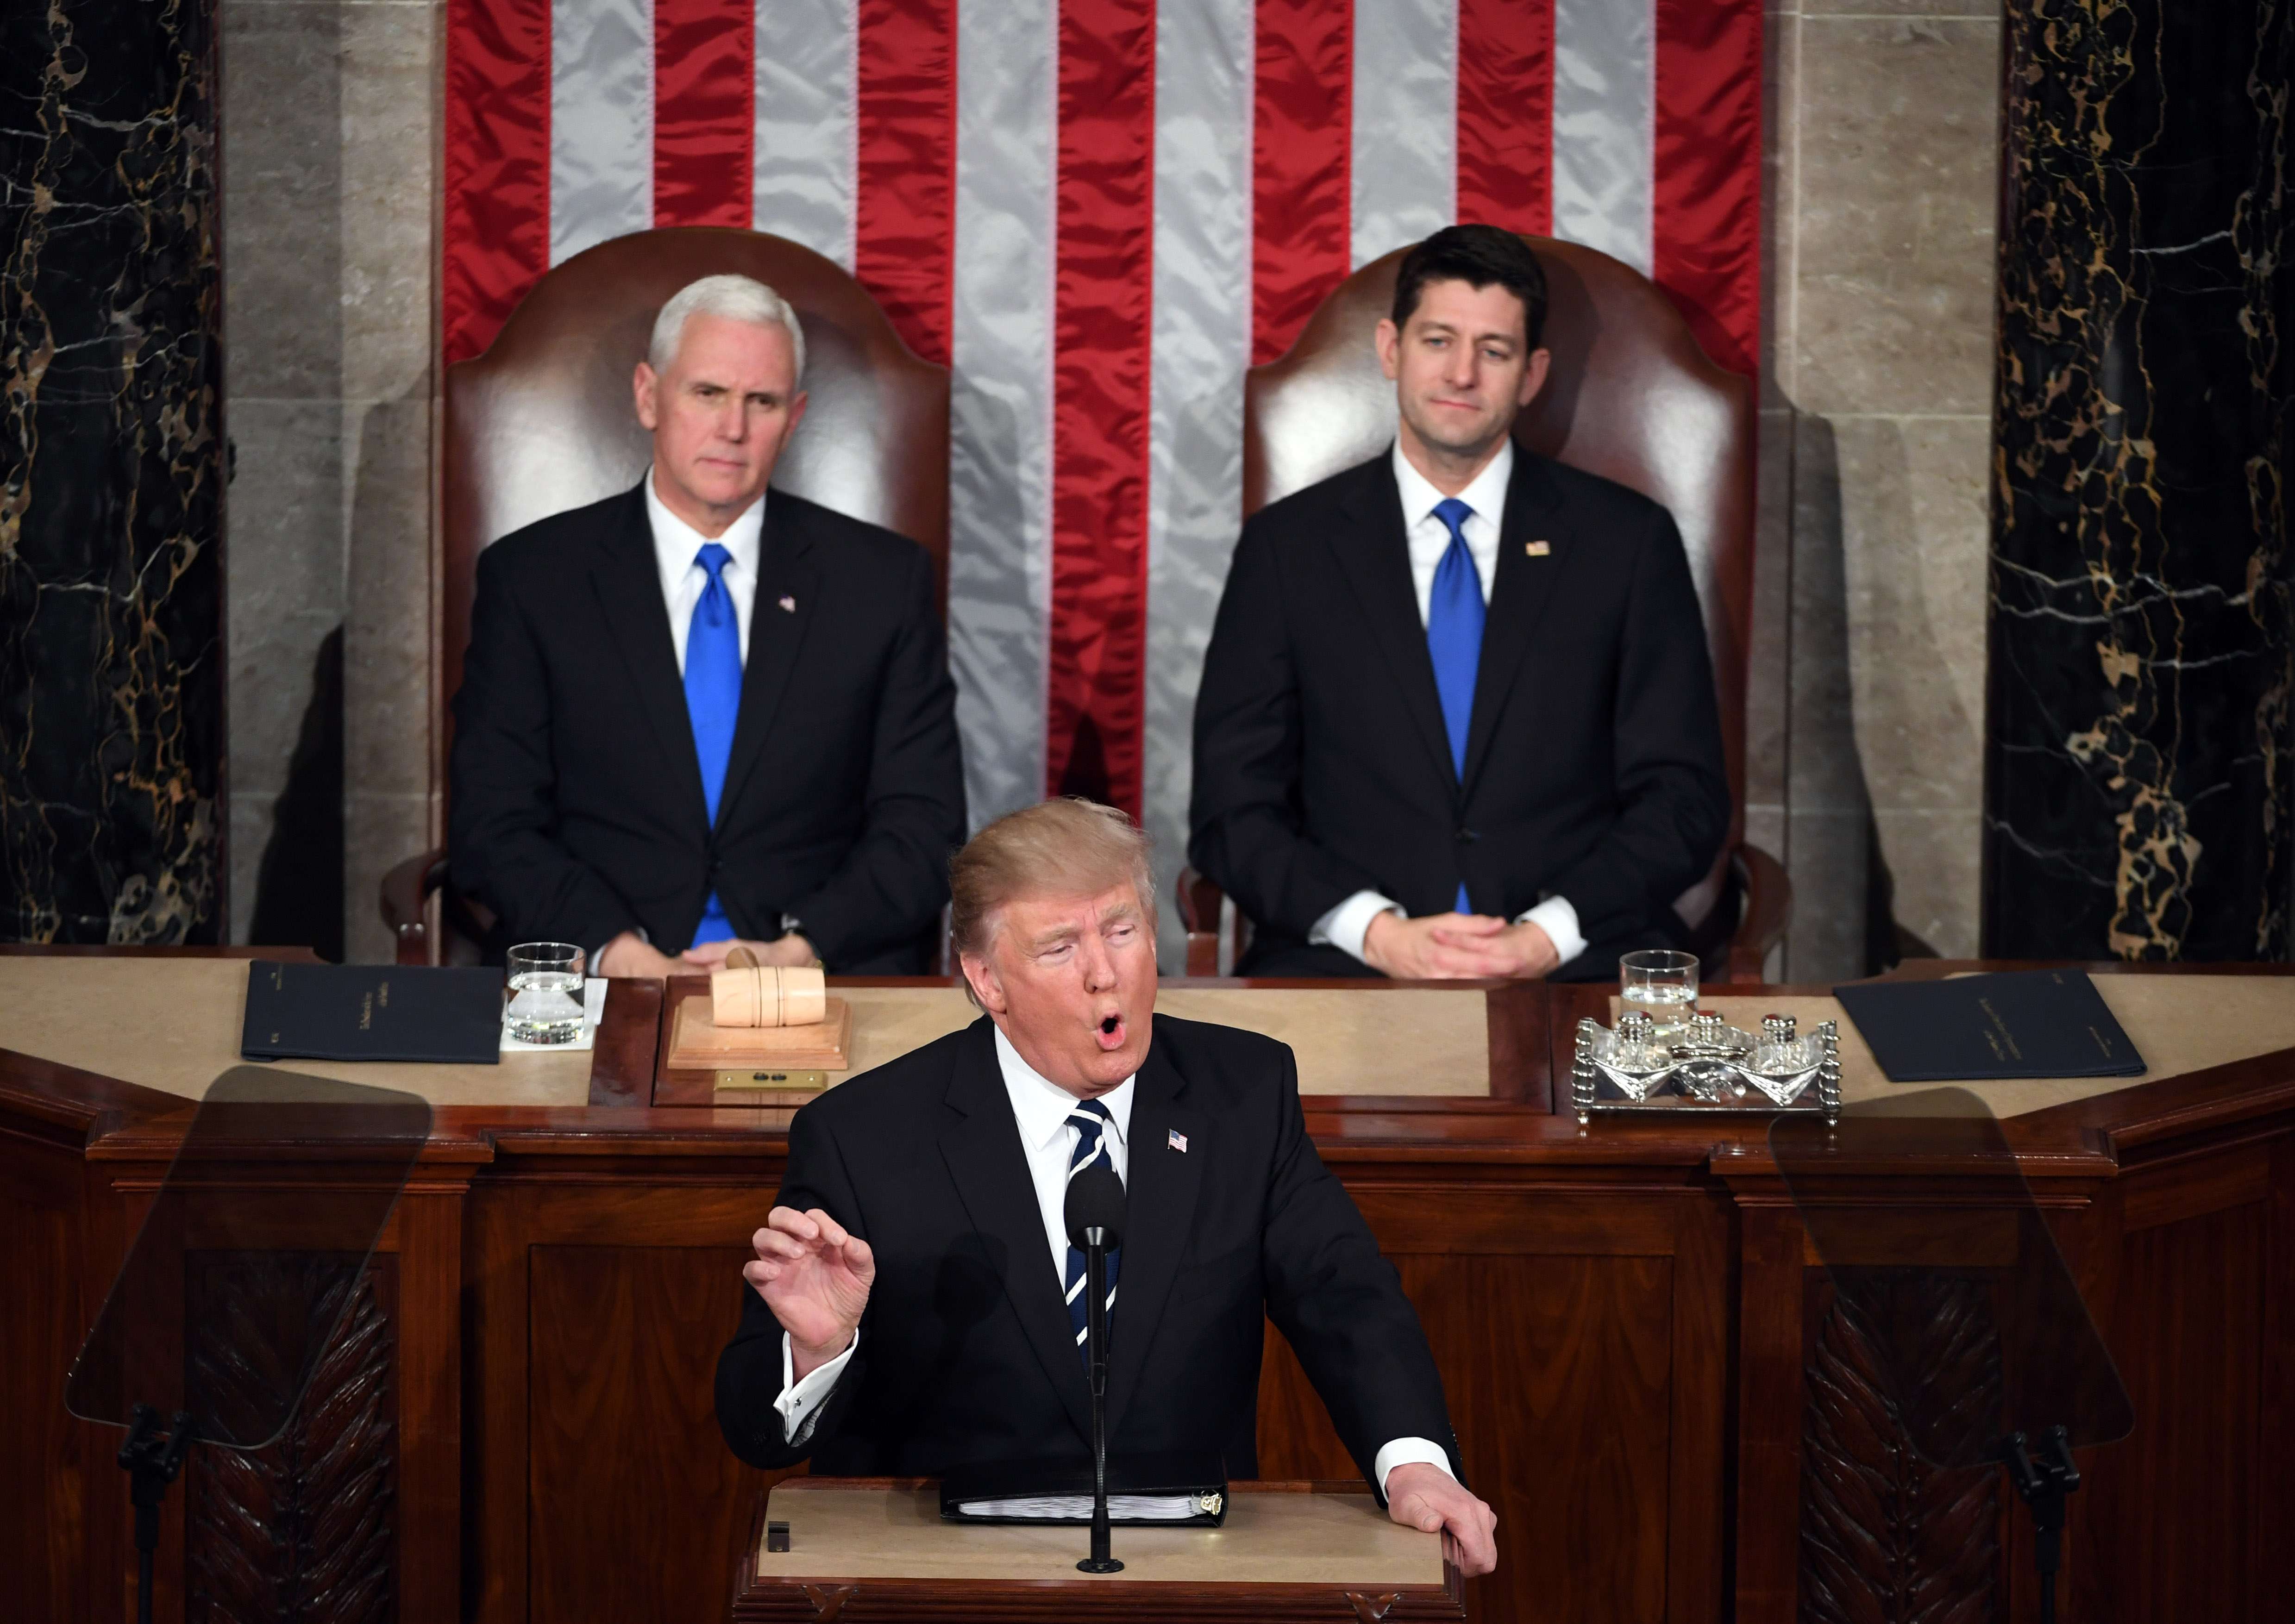 US President Donald Trump addresses a joint session of Congress, as Vice-President Mike Pence (left) and House Speaker Paul Ryan listen, in Washington on February 28. Photo: Xinhua